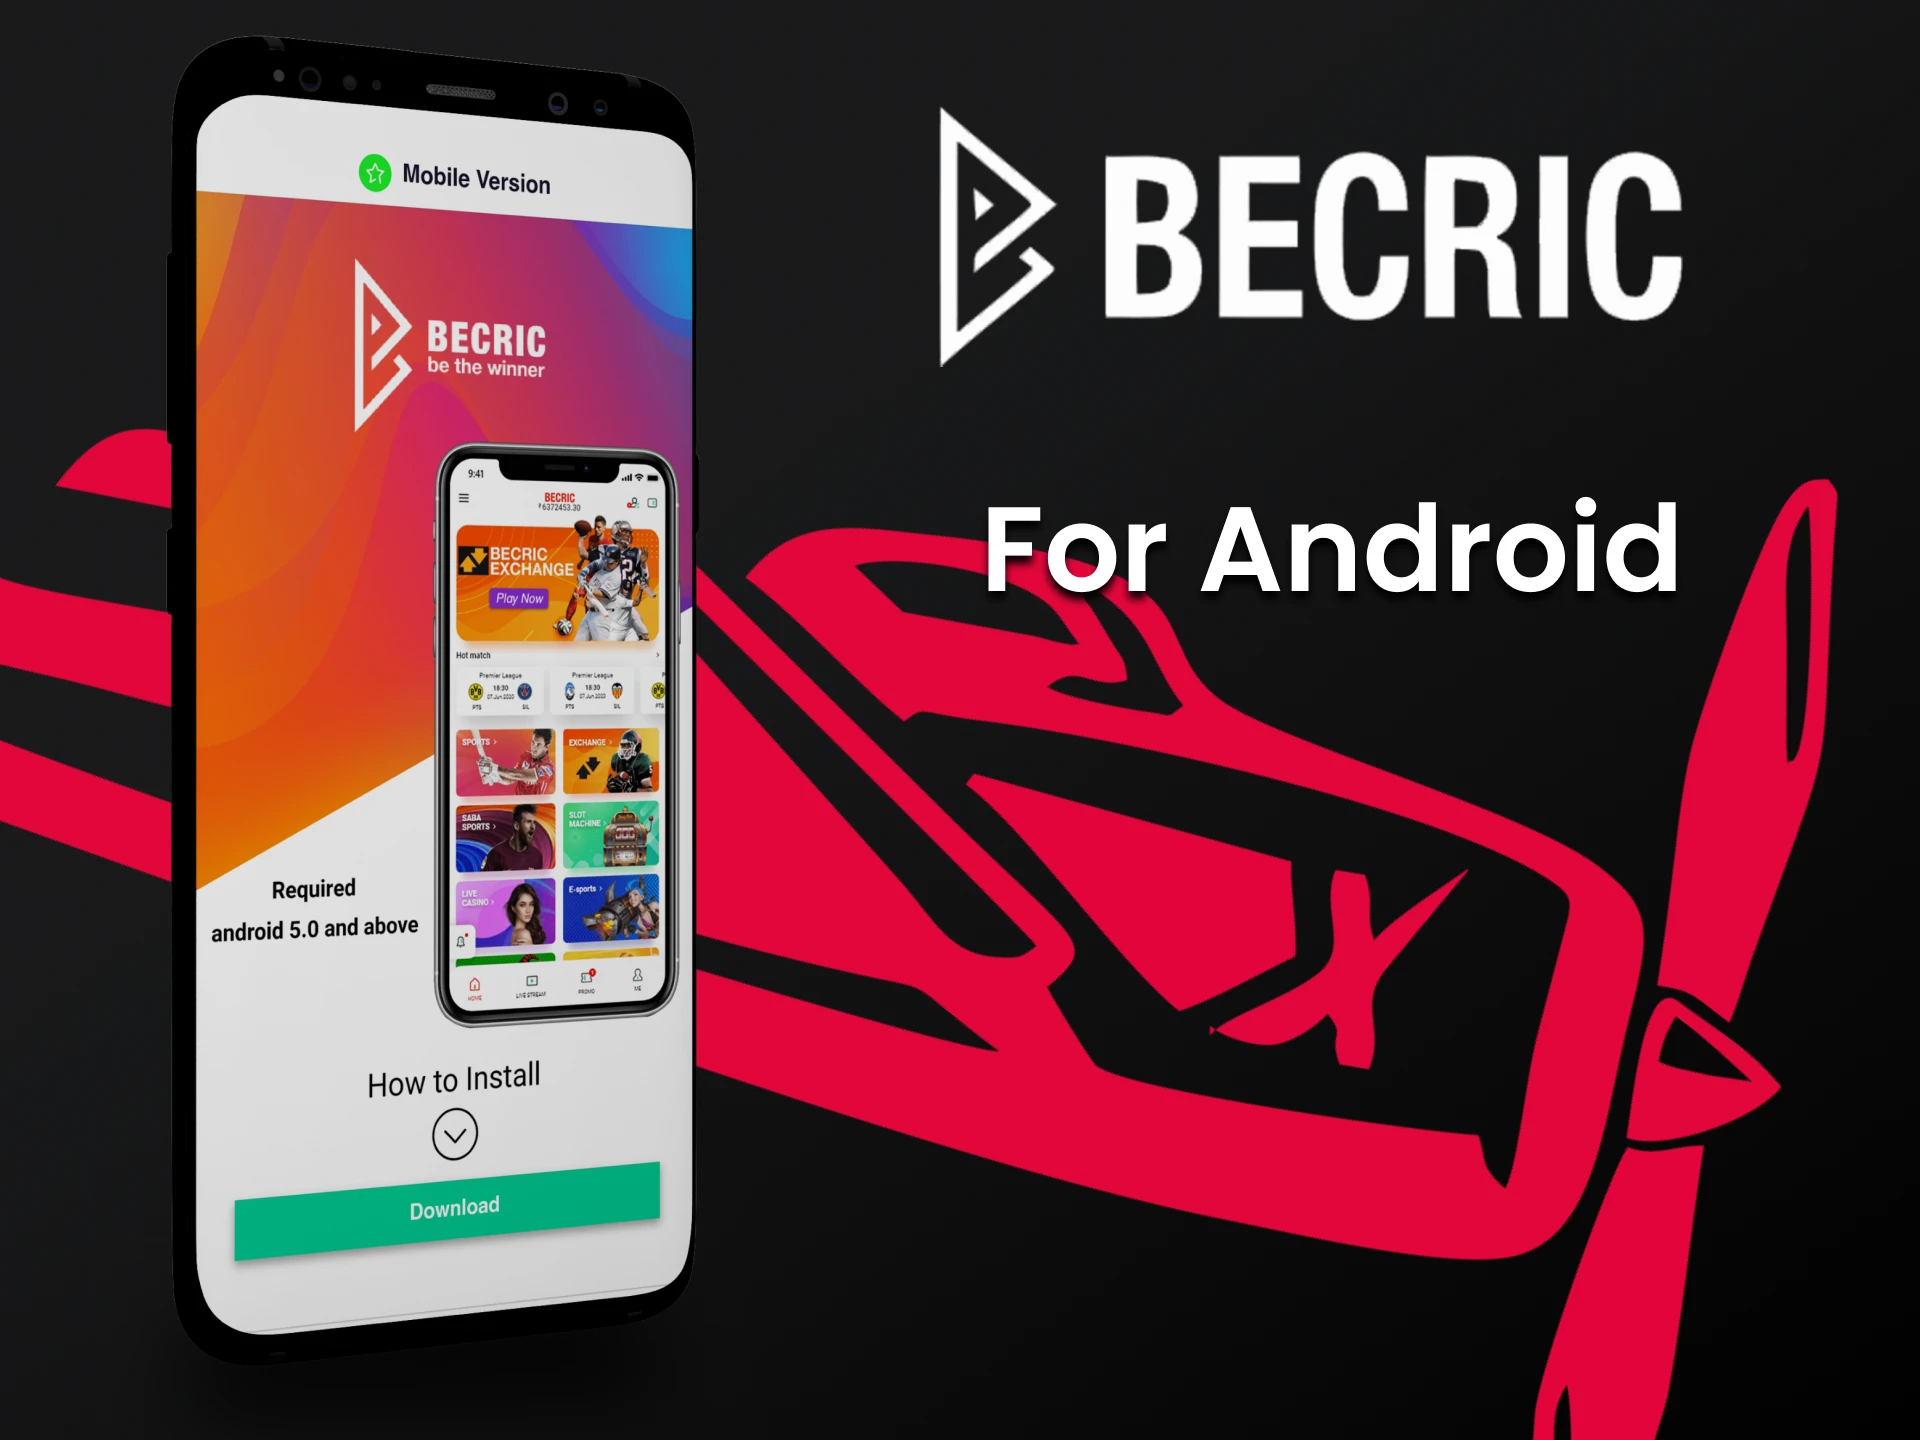 You can play Aviator by installing the Becric application on your Android device.